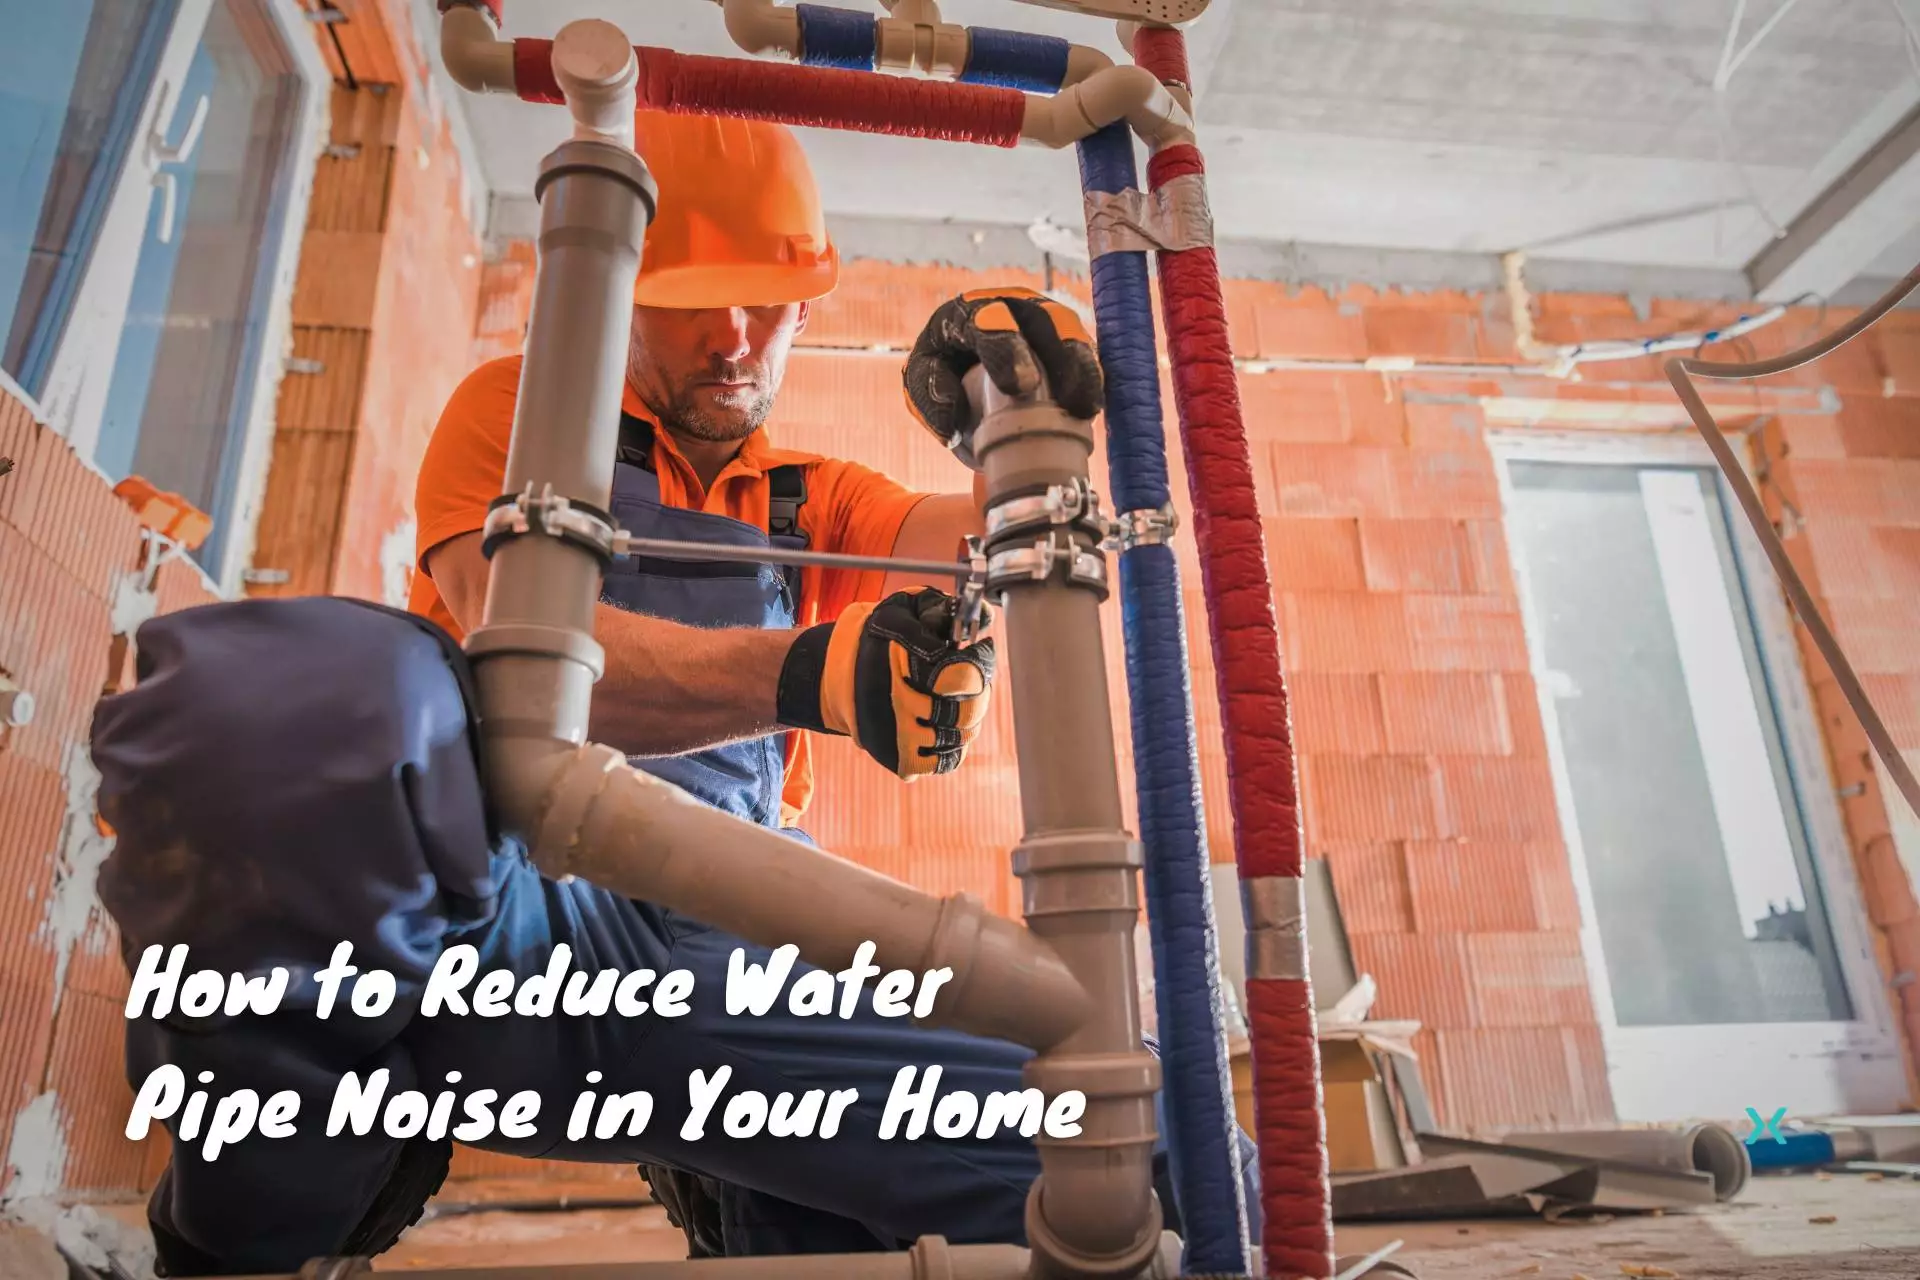 How to Reduce Water Pipe Noise in Your Home